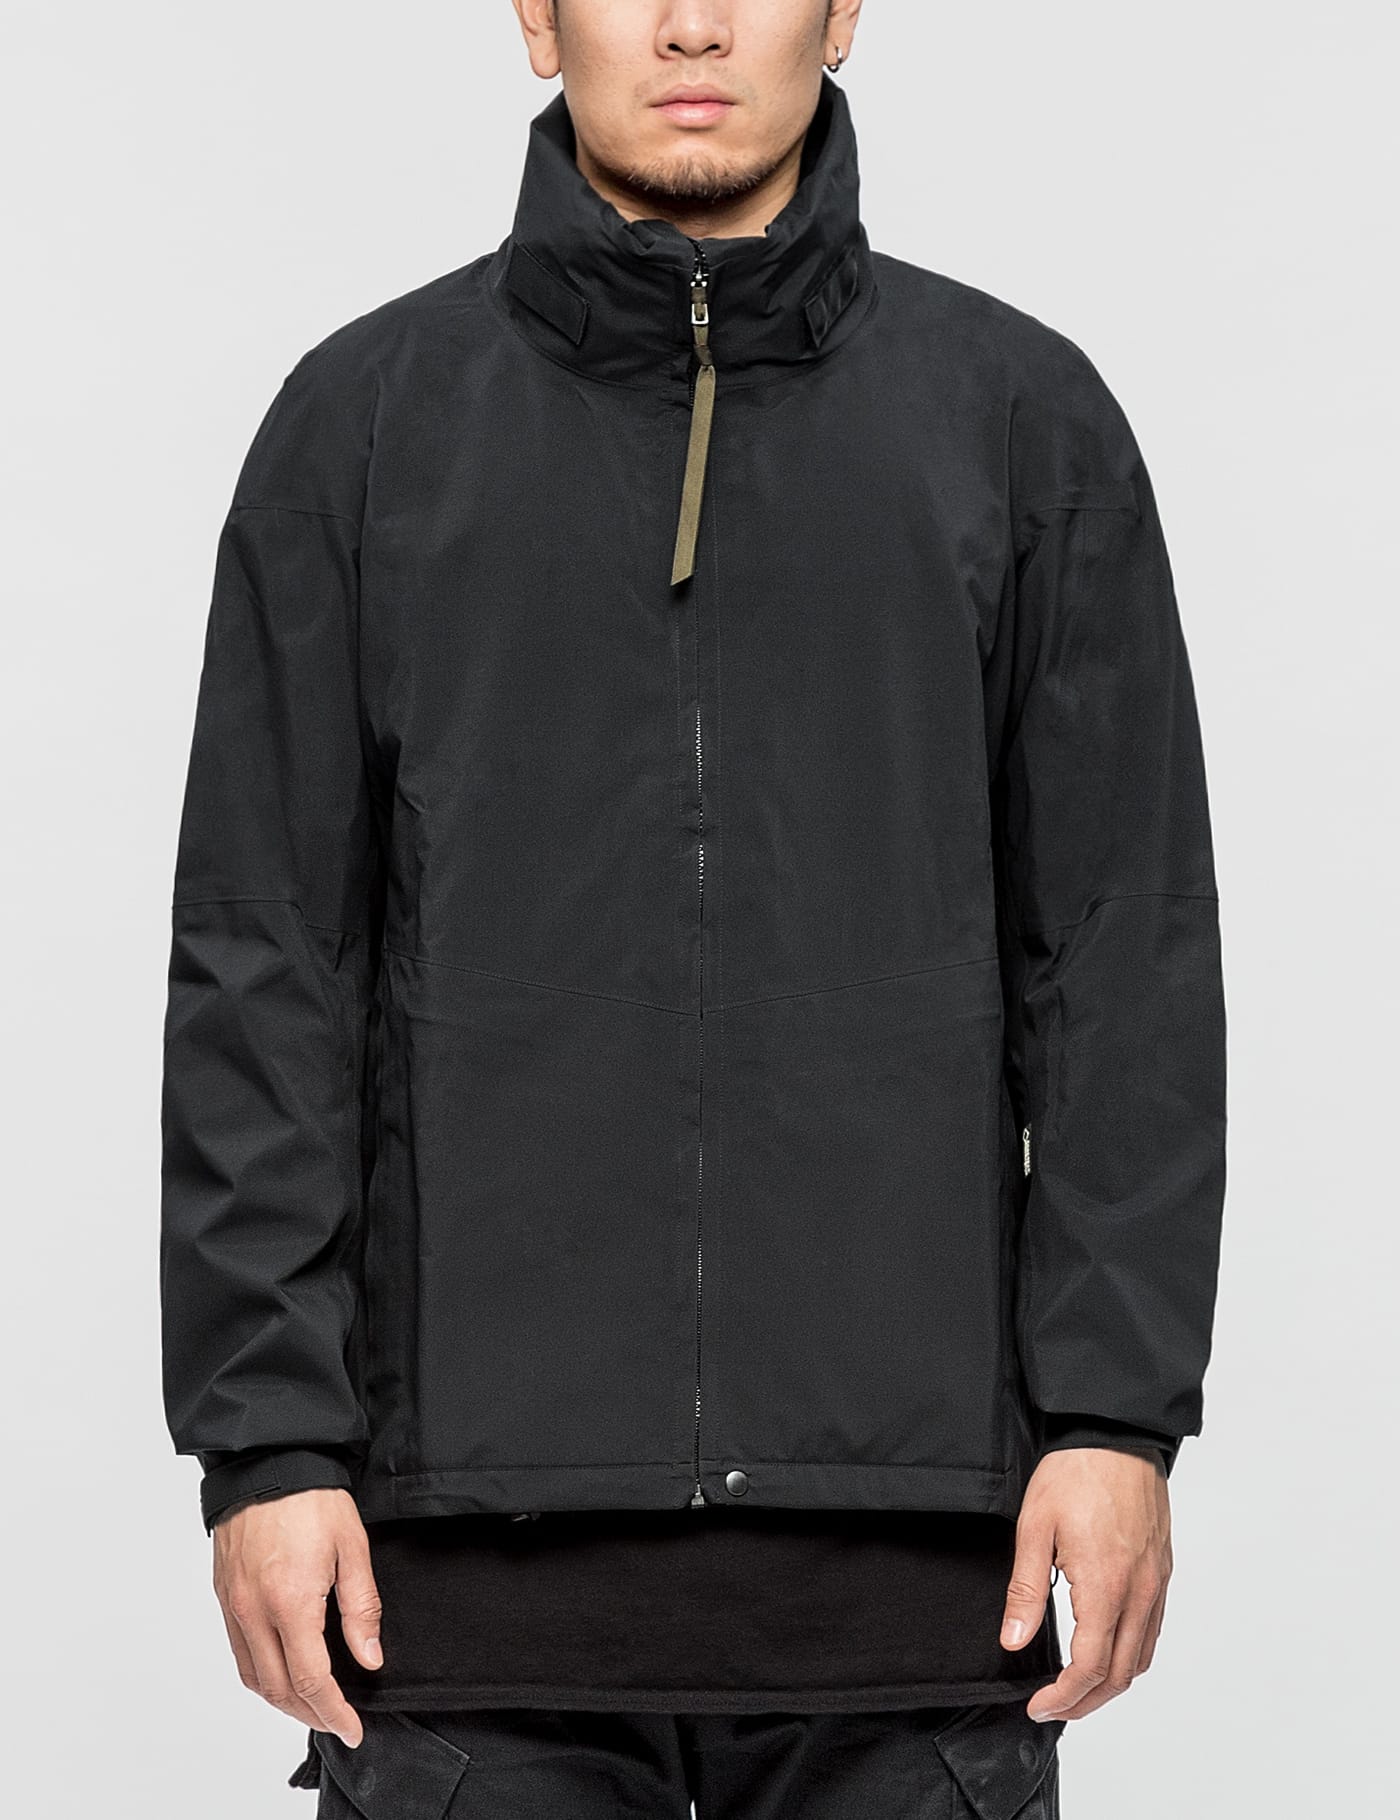 ACRONYM - Black J43-GT Jacket | HBX - Globally Curated Fashion and 